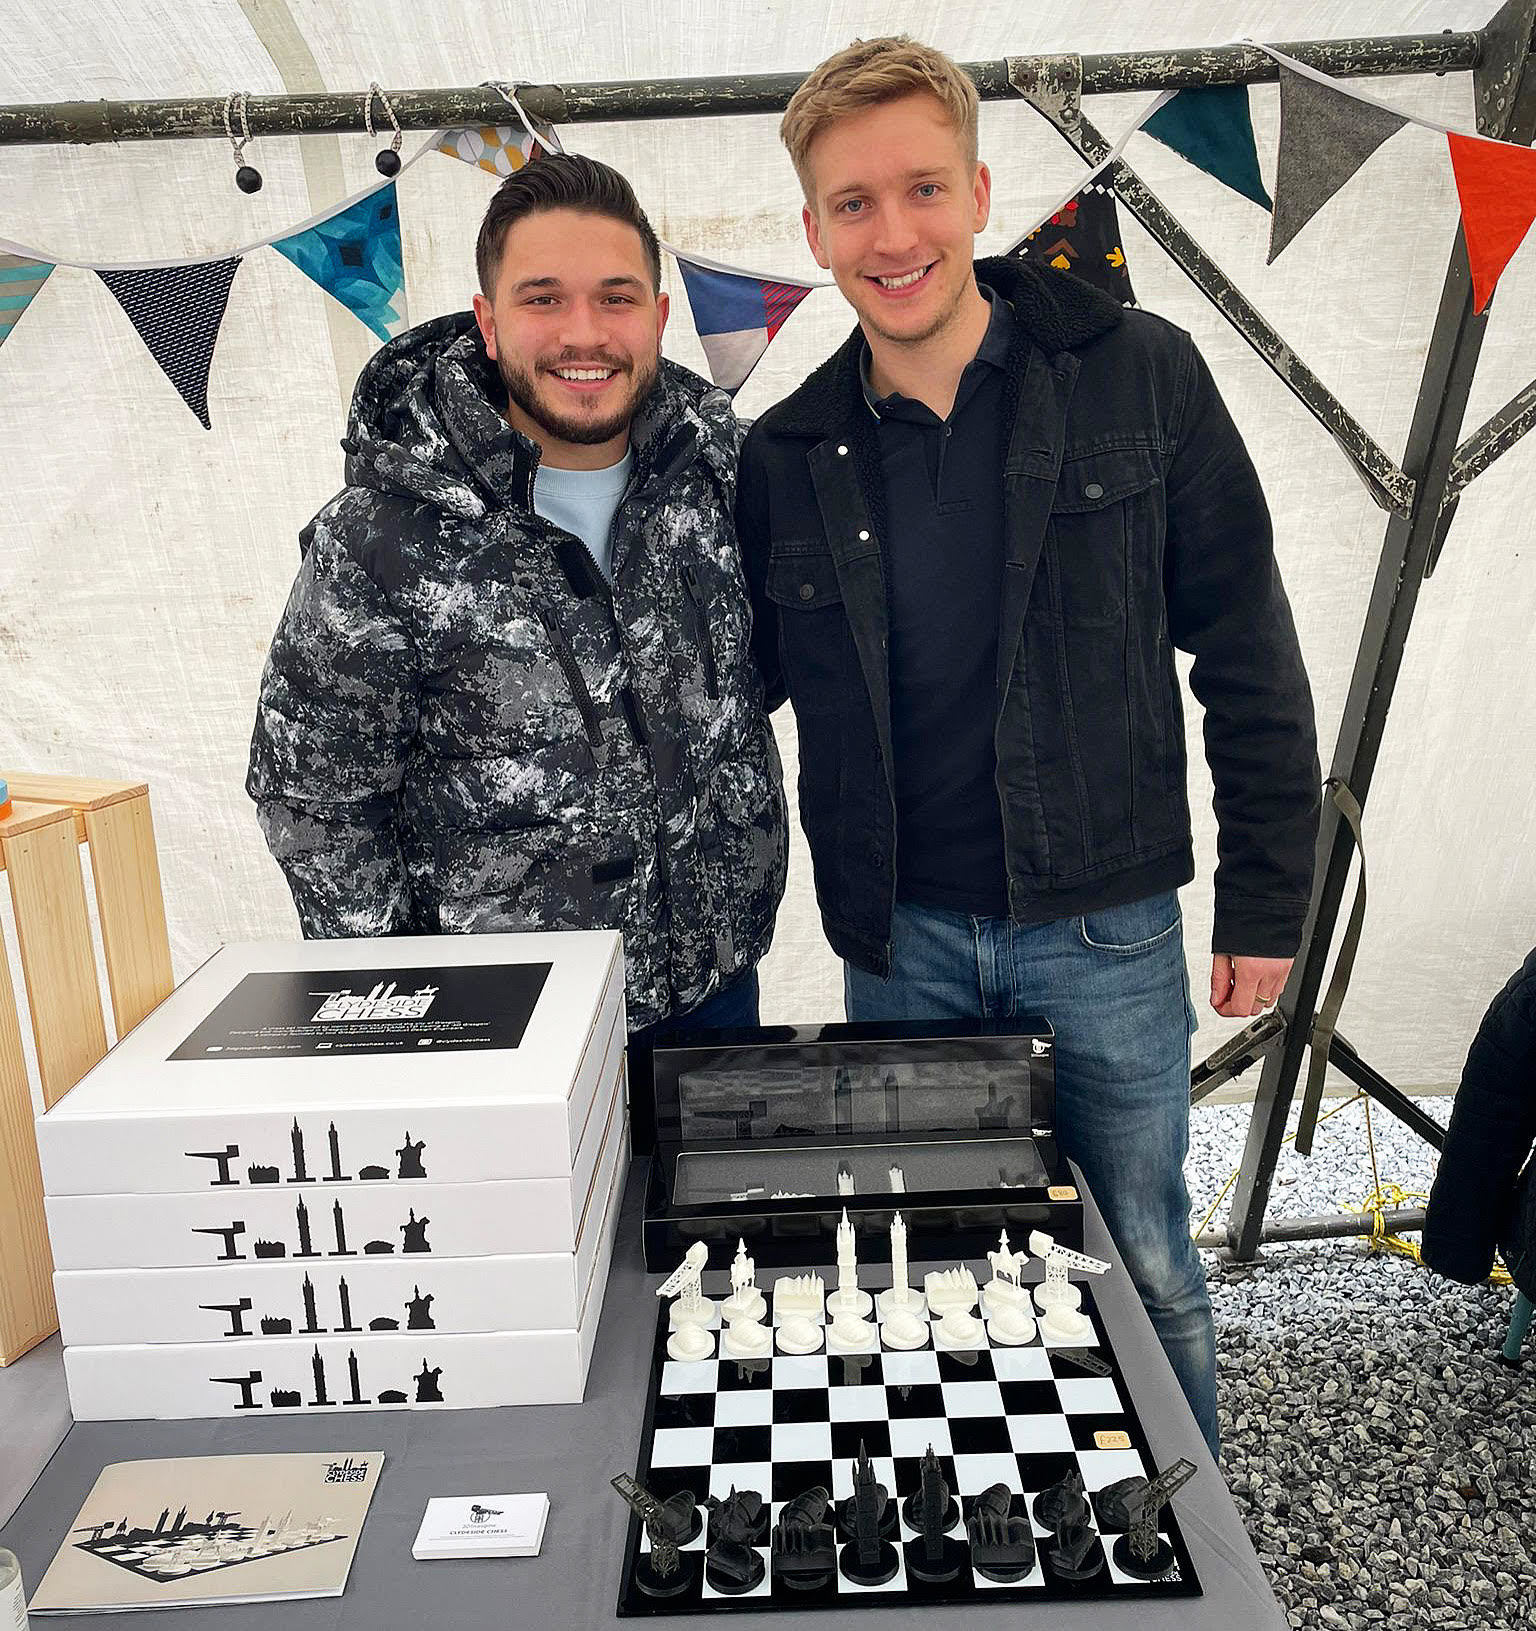 Michael O’Donnell and Alex Duff are taking their city chess set idea nationwide